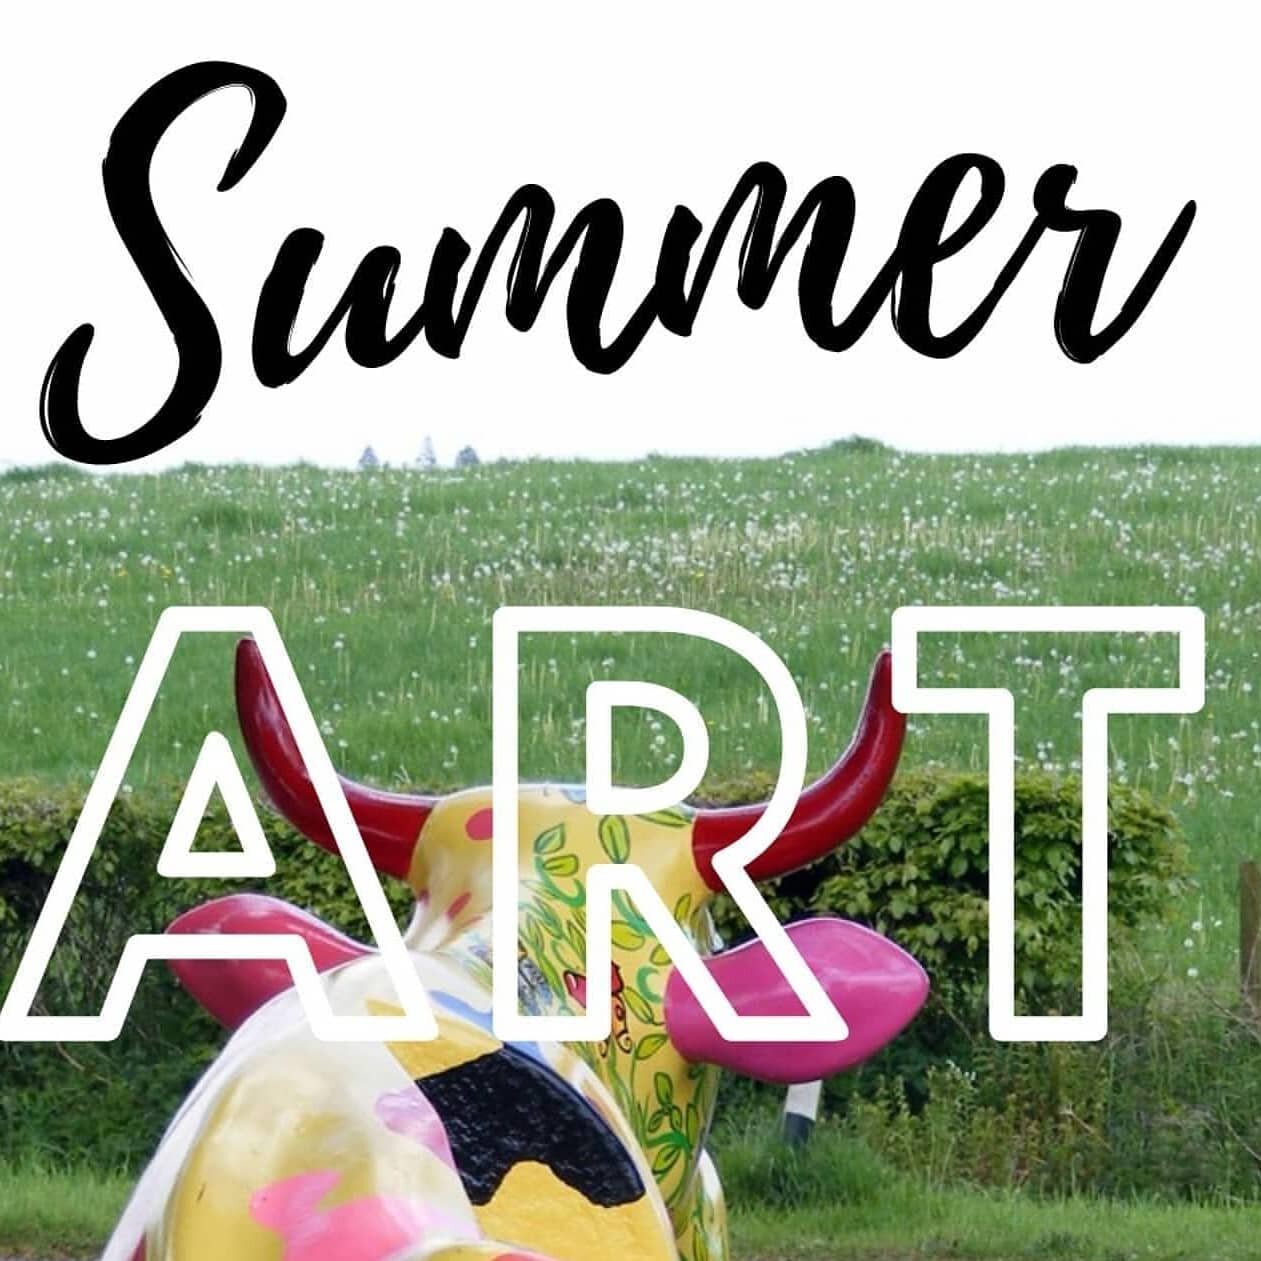 Summer Art at the Cottage !! Join Gina on new art adventures this SUMMER !! ,
.
Camp details and registration starts next week online !
.
.
#ginamariesart #summerart #summer #summercamp #artcamp #boerne #boernetx #childrensartstudio #summertime #thin